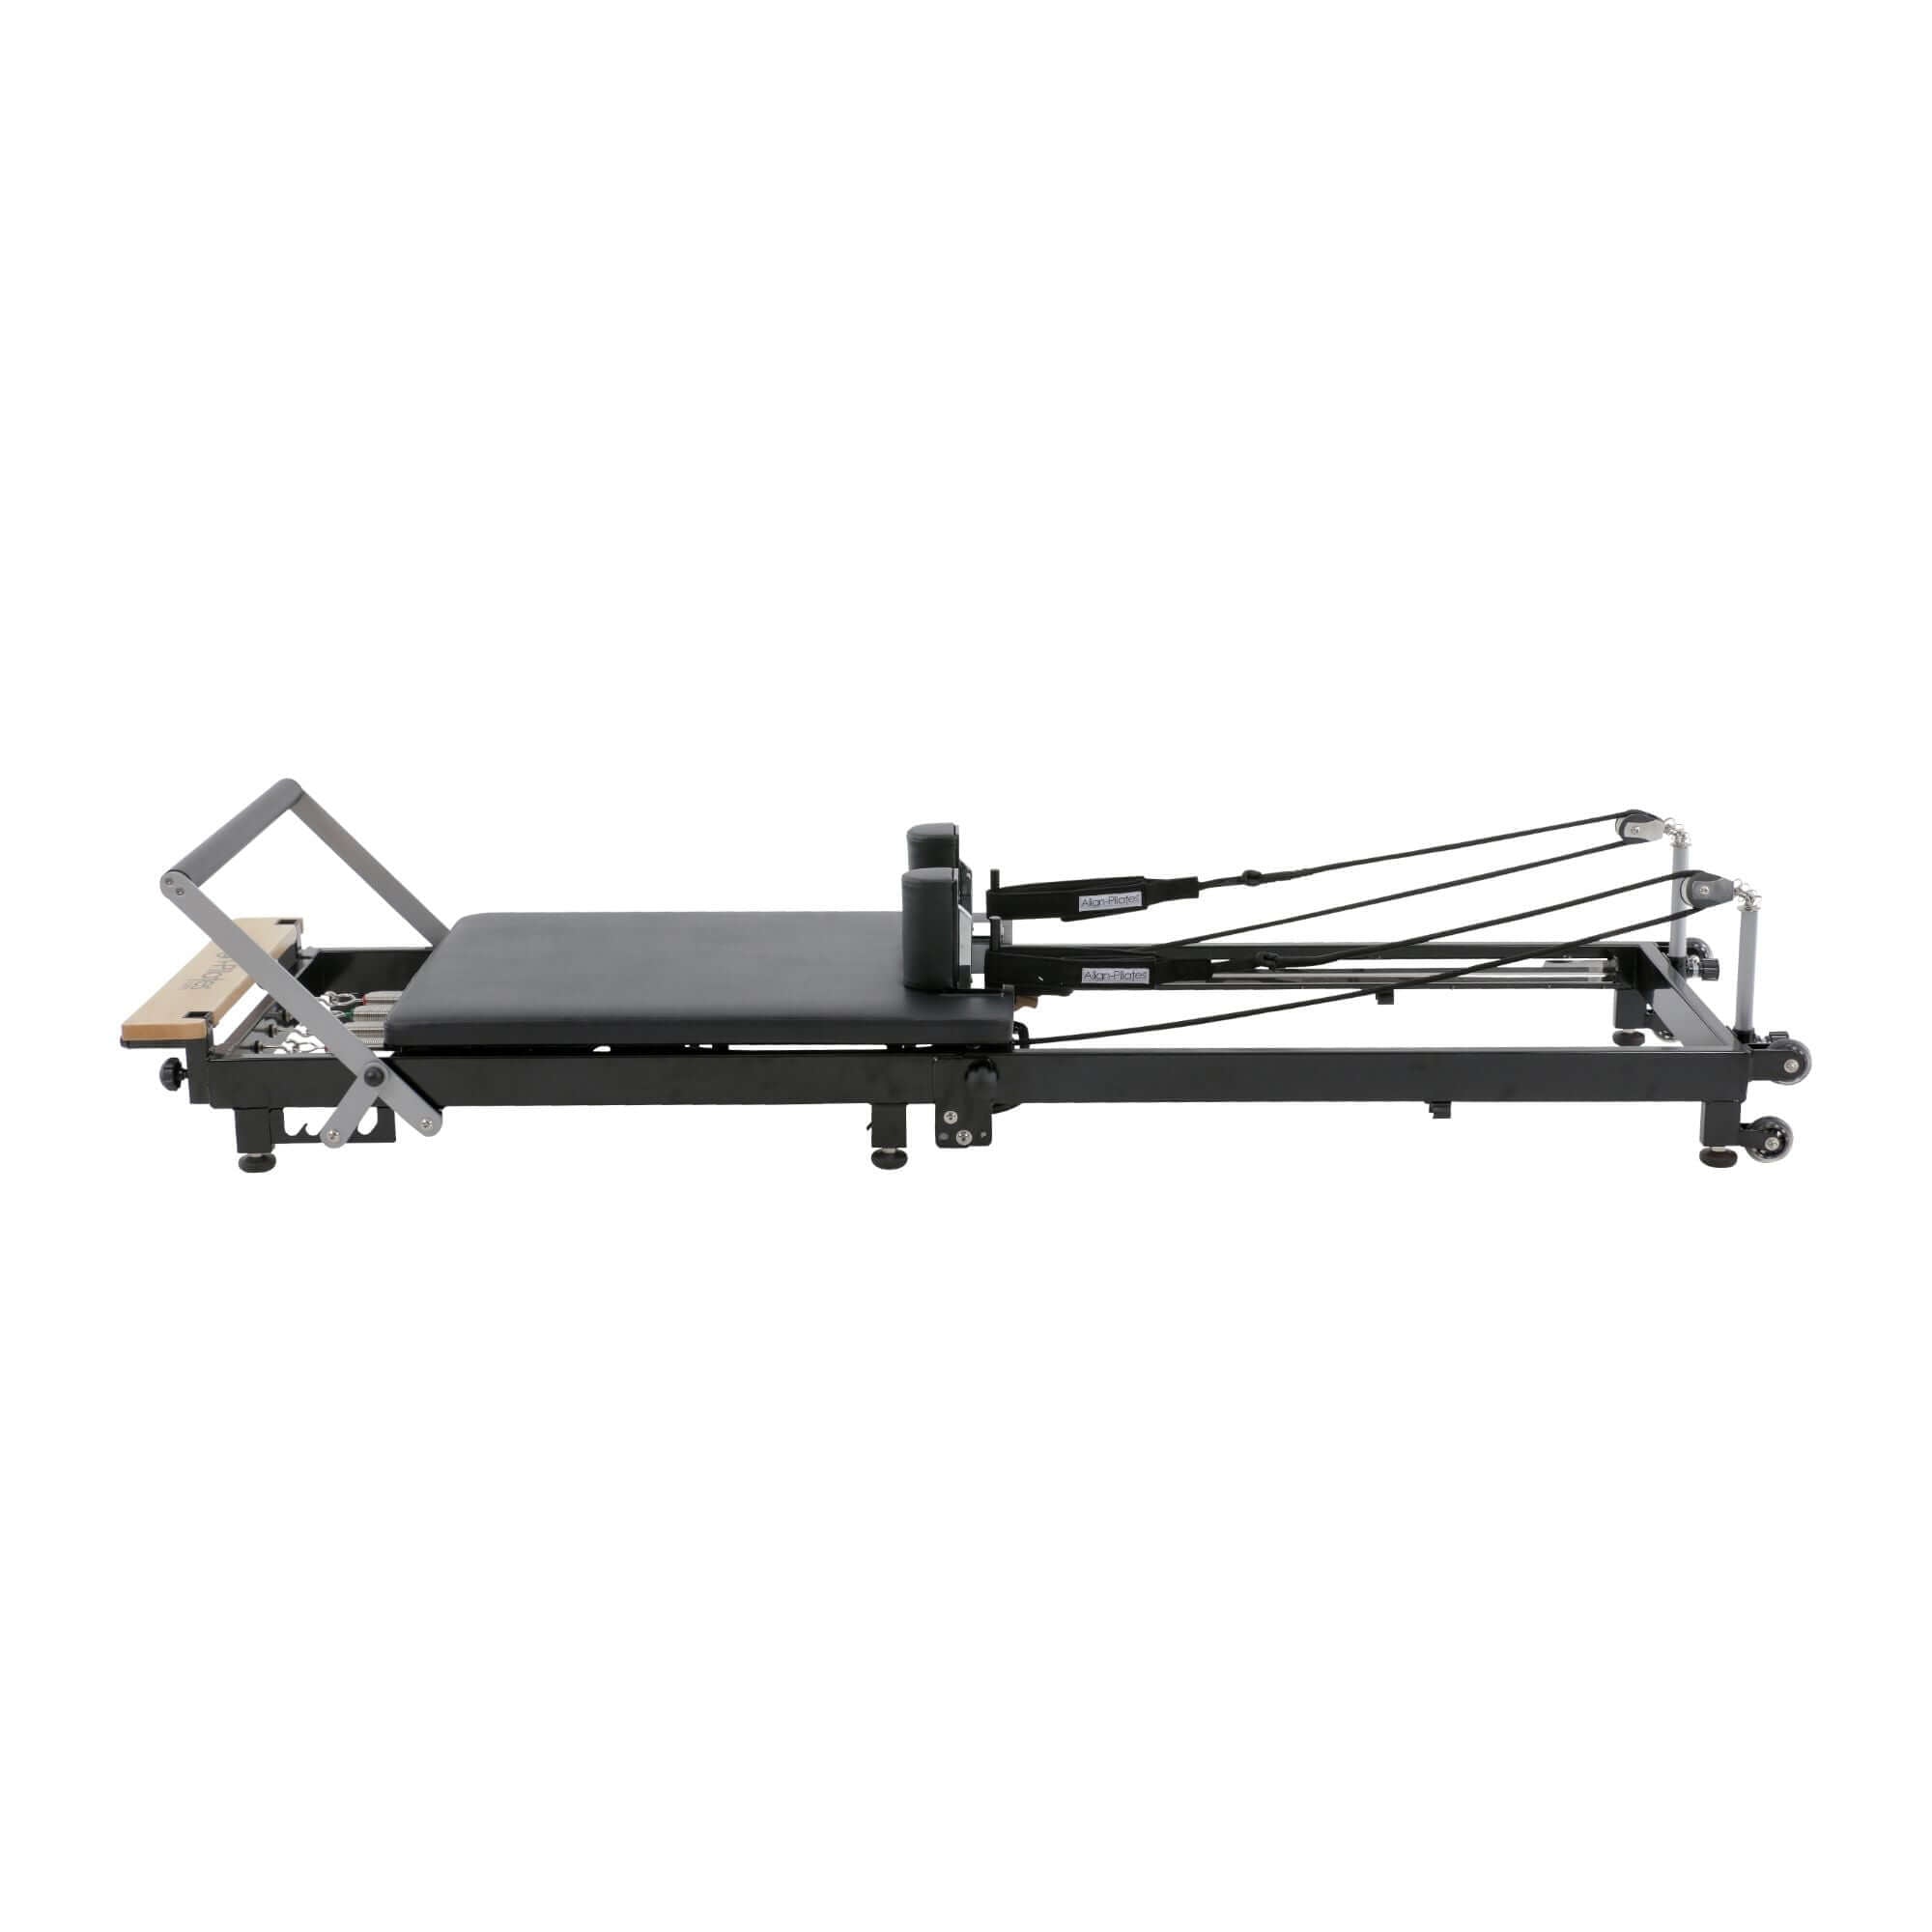 Image of an Align Pilates F2 folding reformer, highlighting its adjustable parts and sturdy frame for pilates exercises.